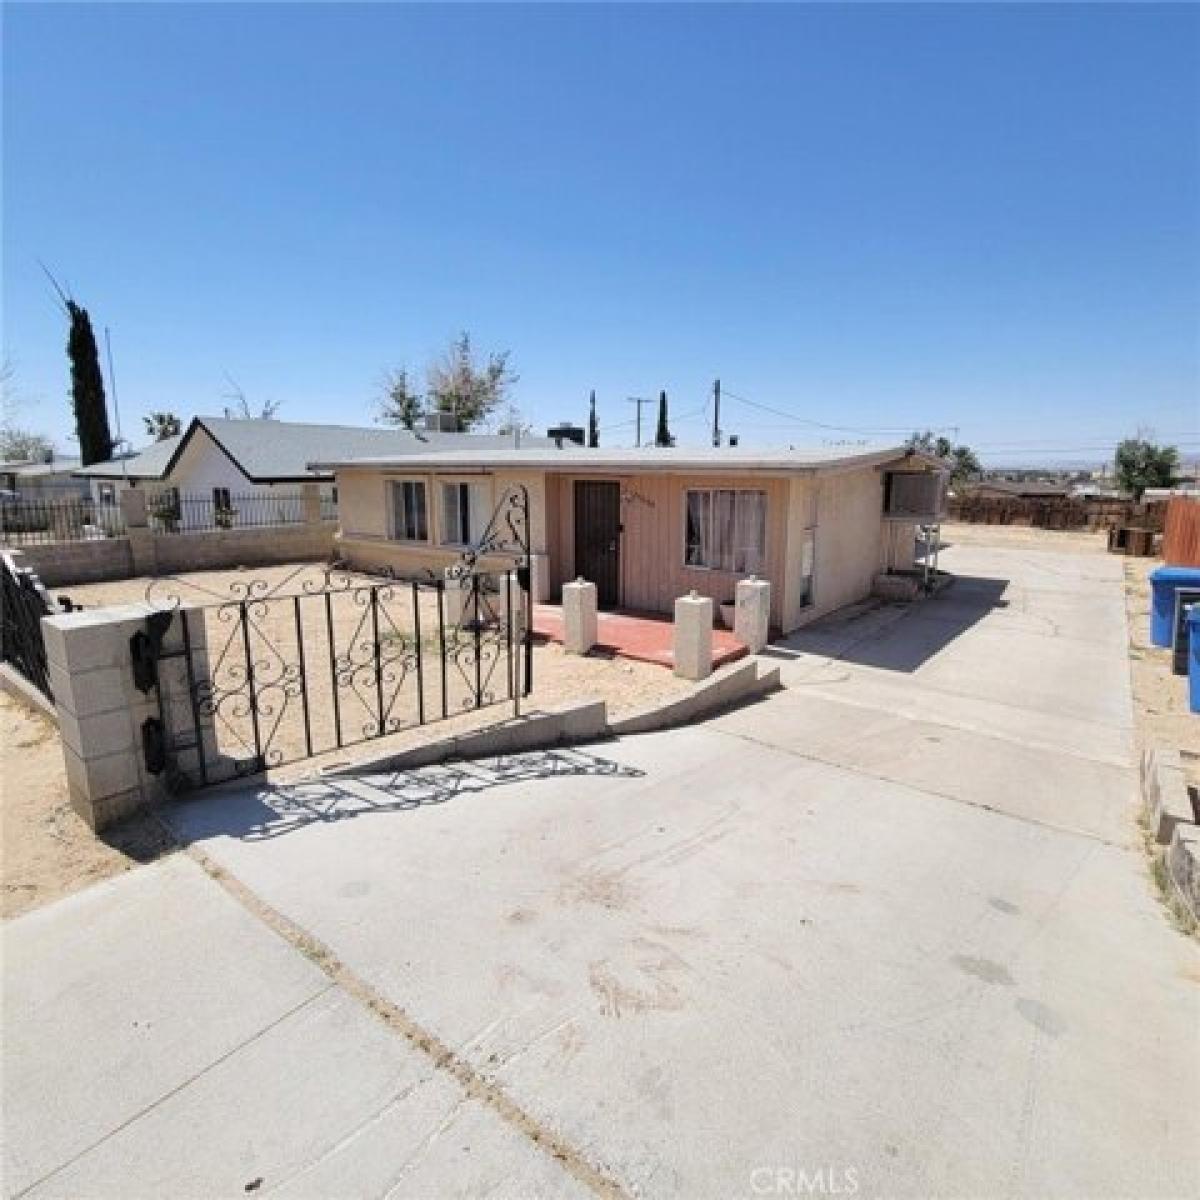 Picture of Home For Sale in Barstow, California, United States